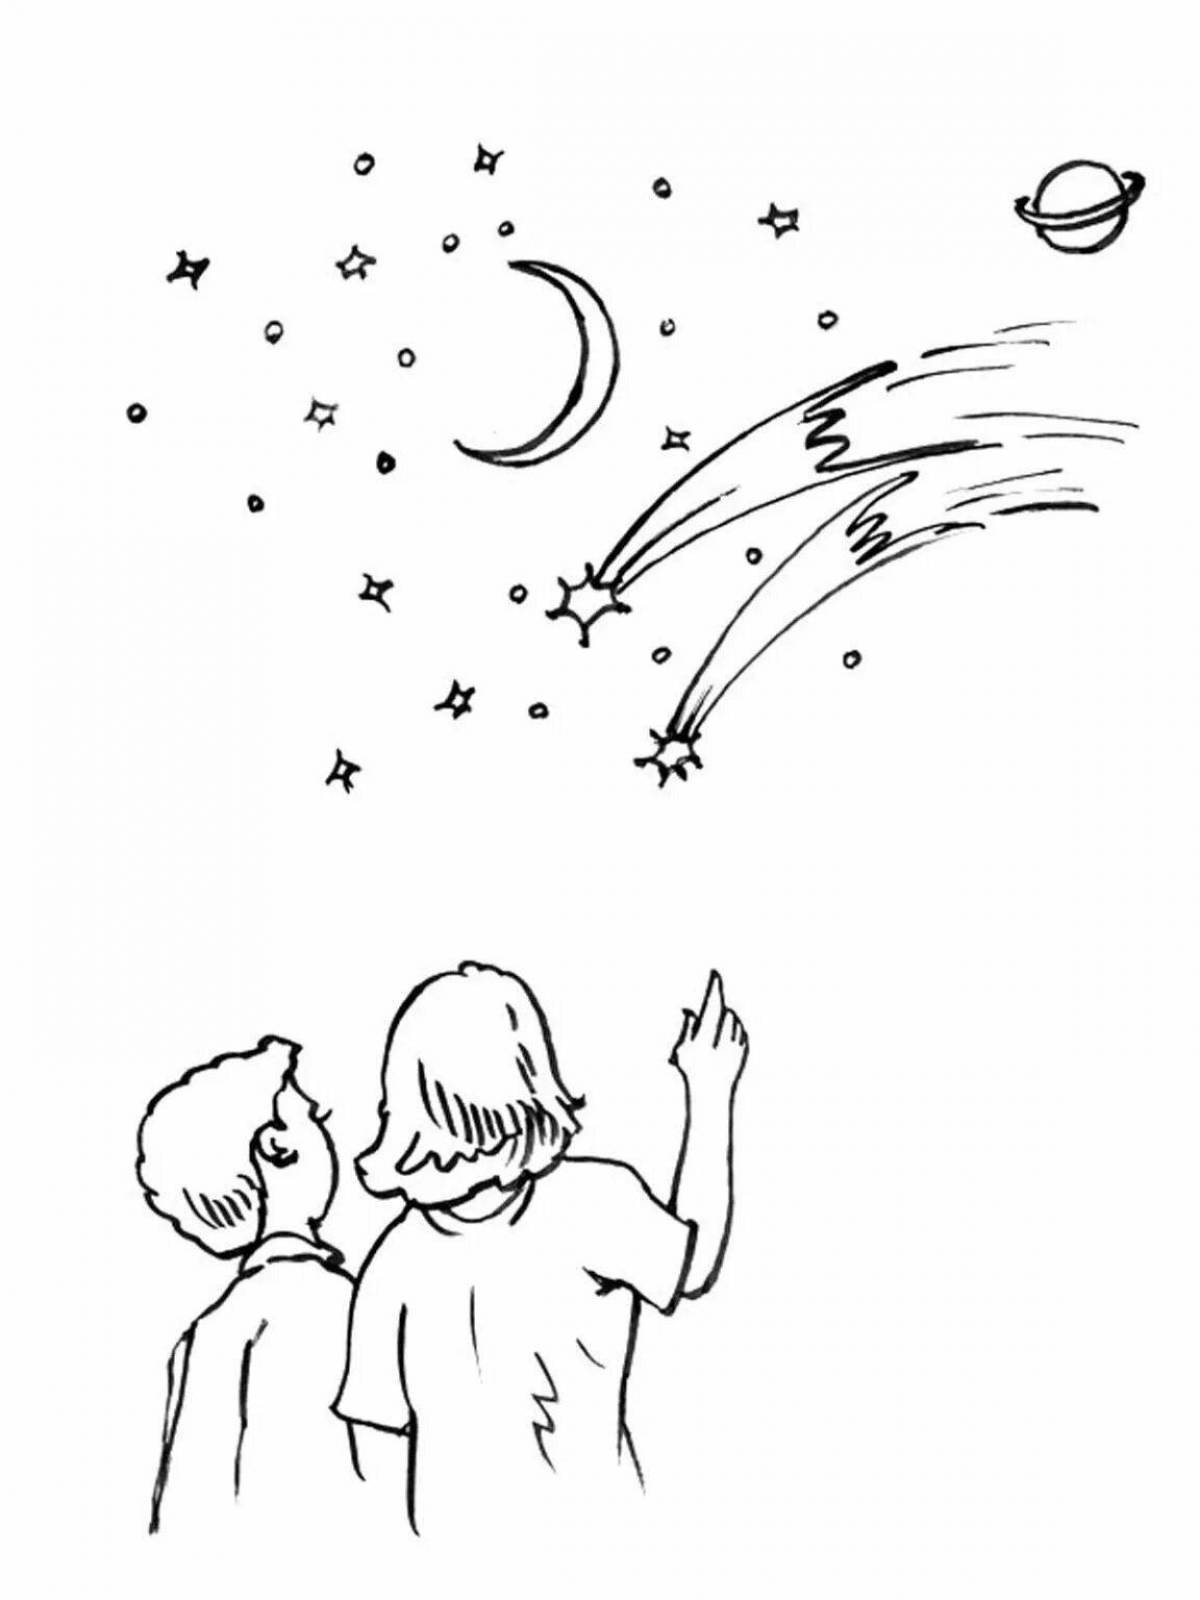 Luminous starry sky coloring book for kids